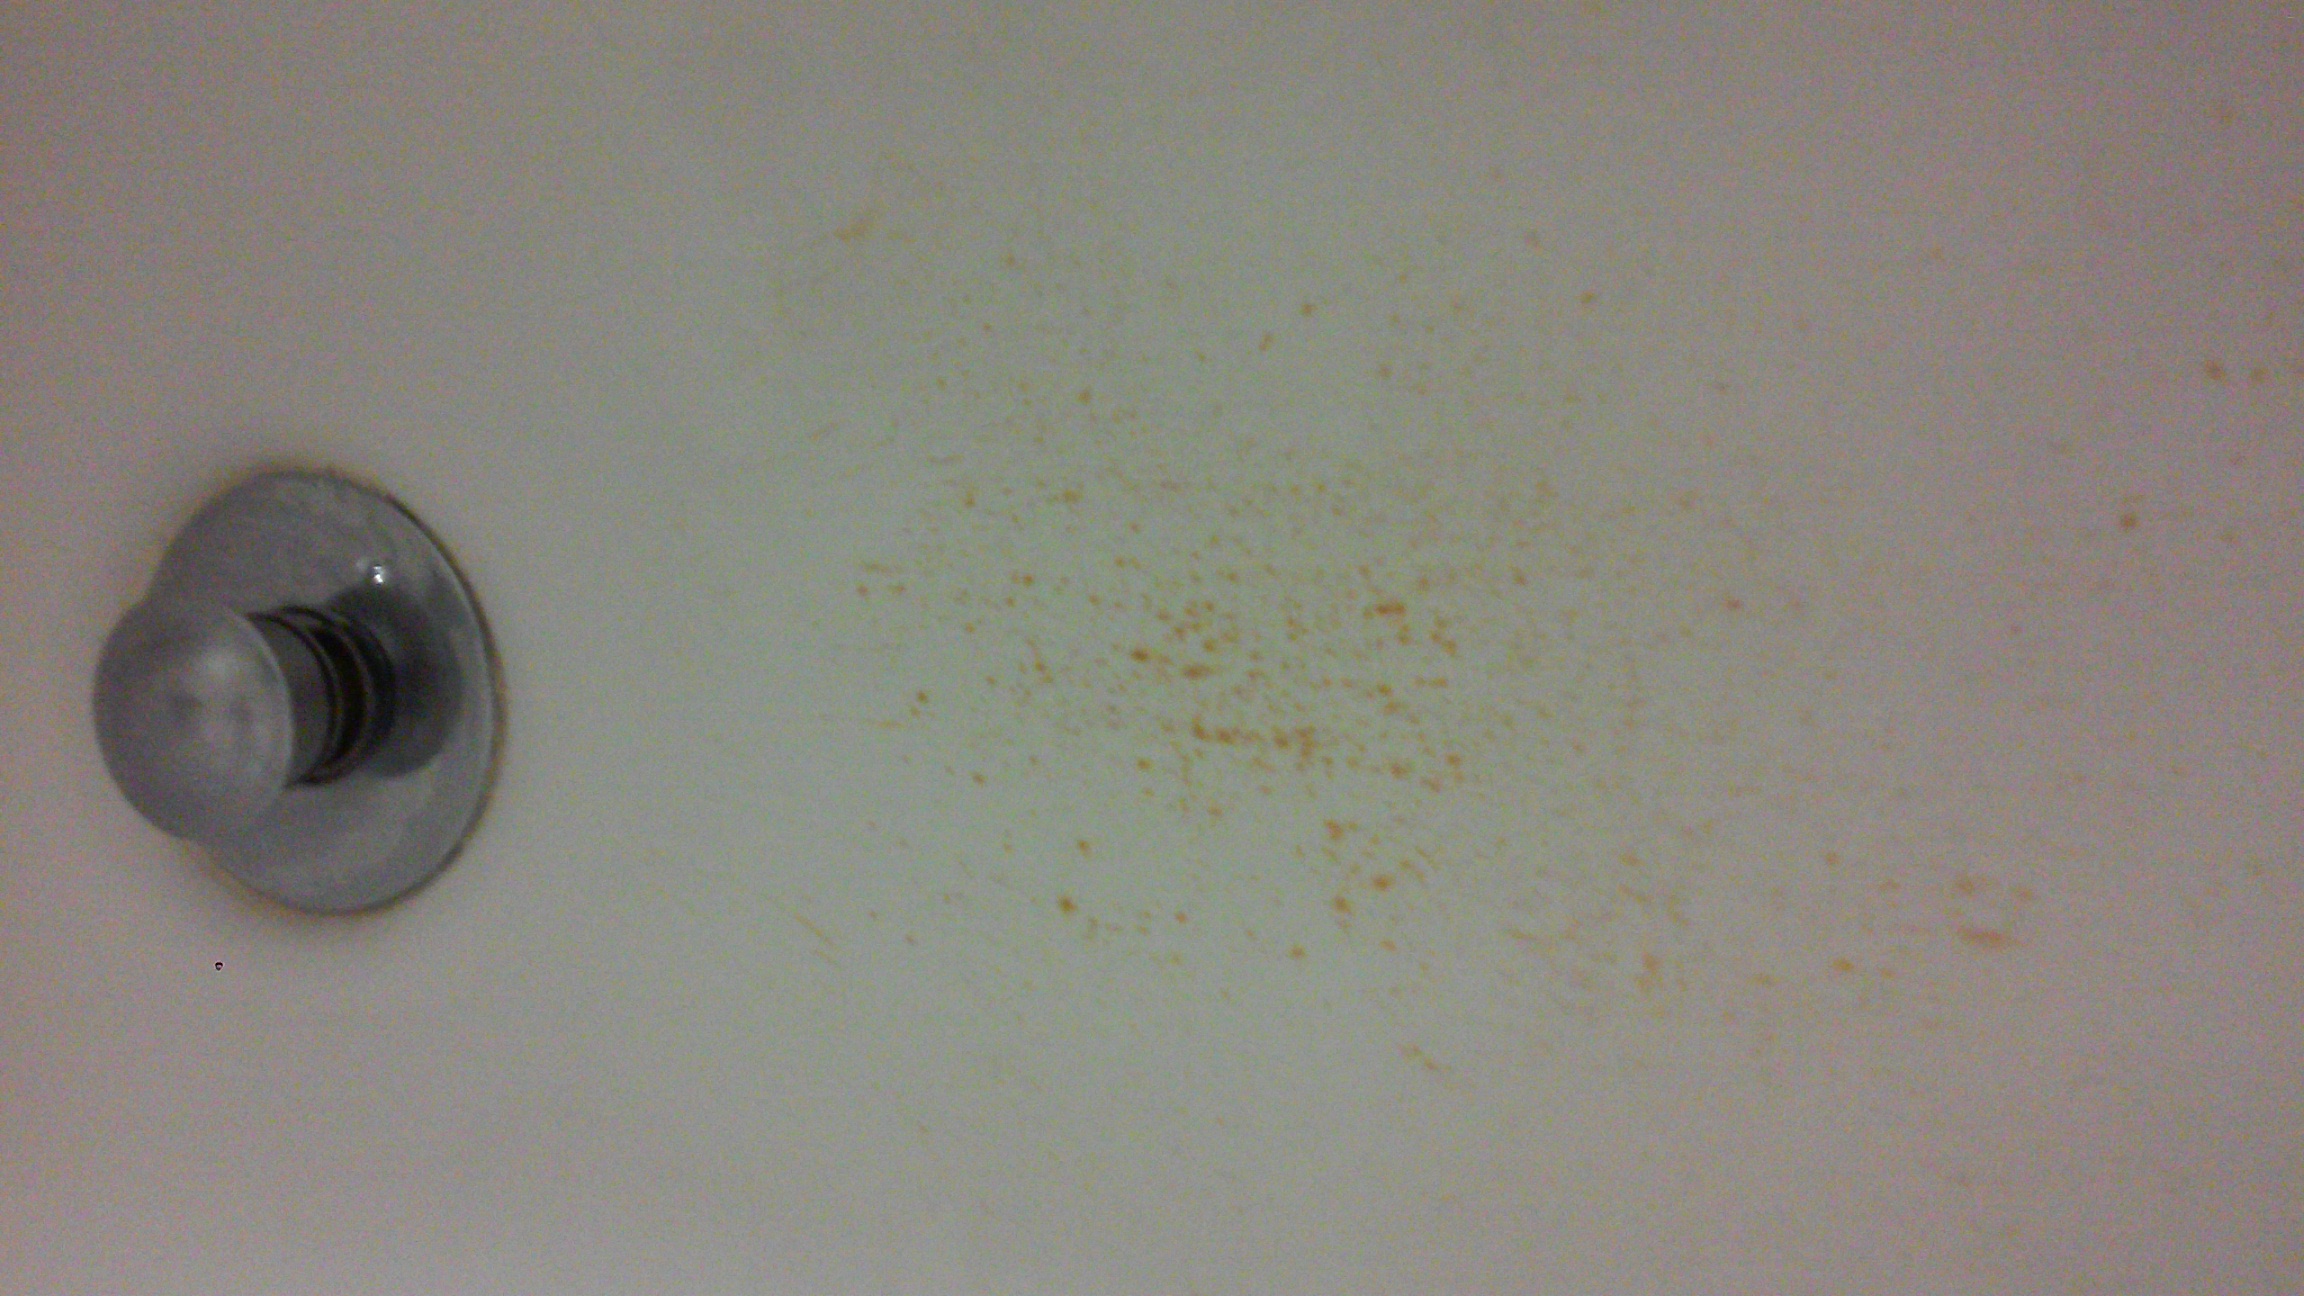 Reddish Brown Is Not A Color Splatter You Want To See In Your Tub